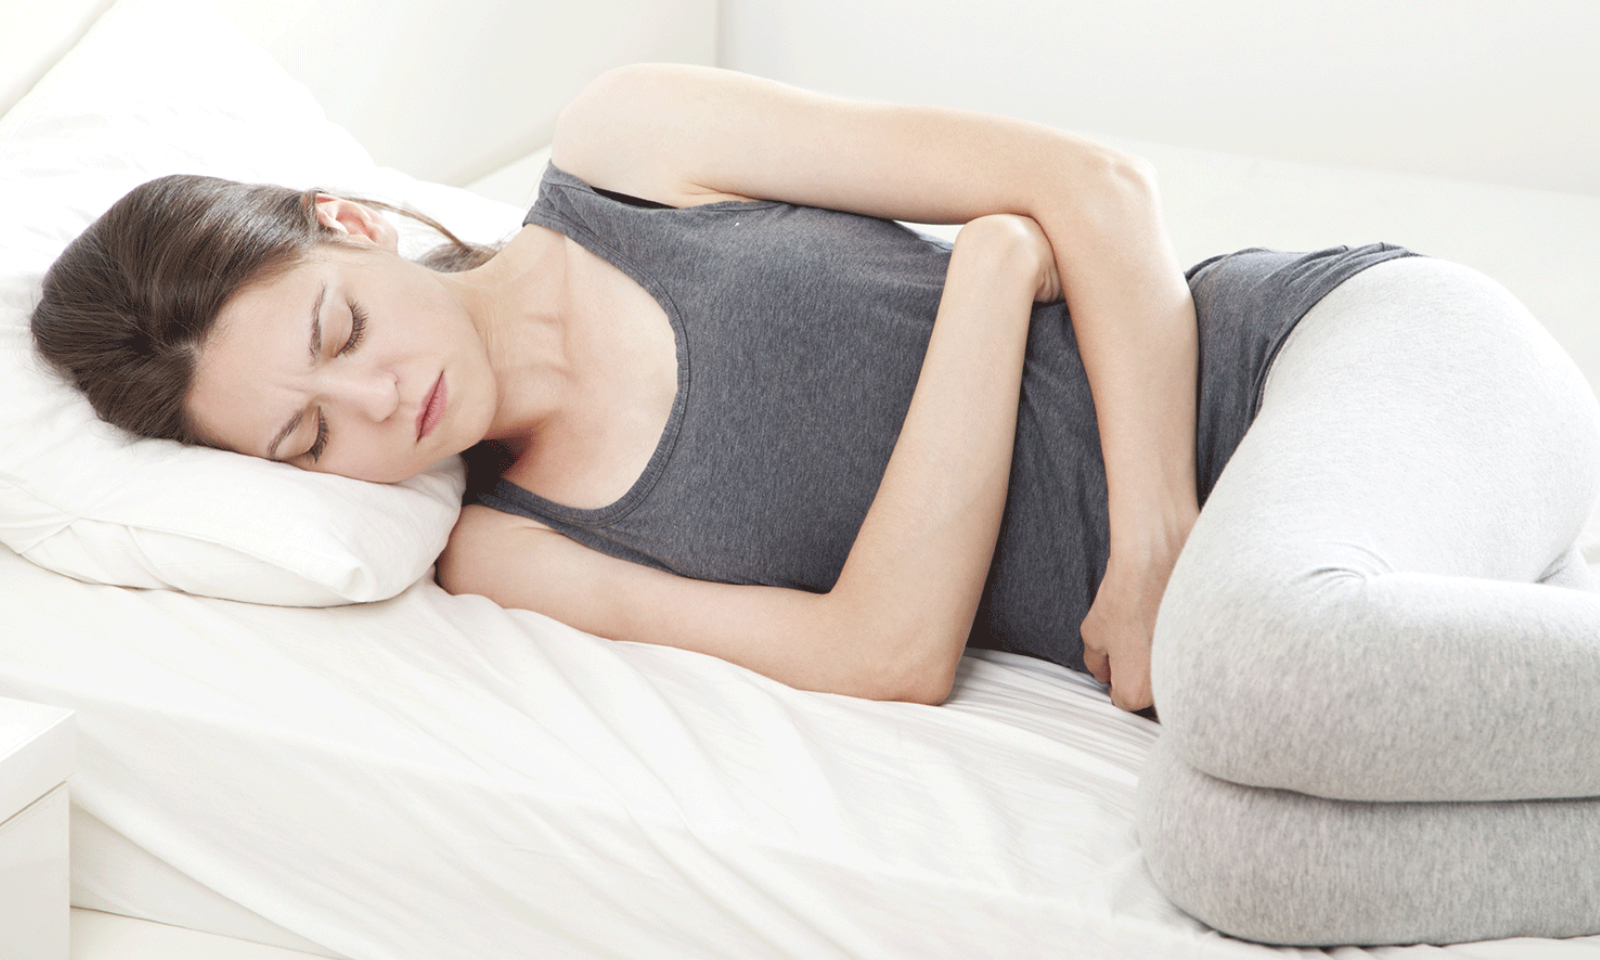 25 Easy Home Remedies to Get Rid of Irregular Periods